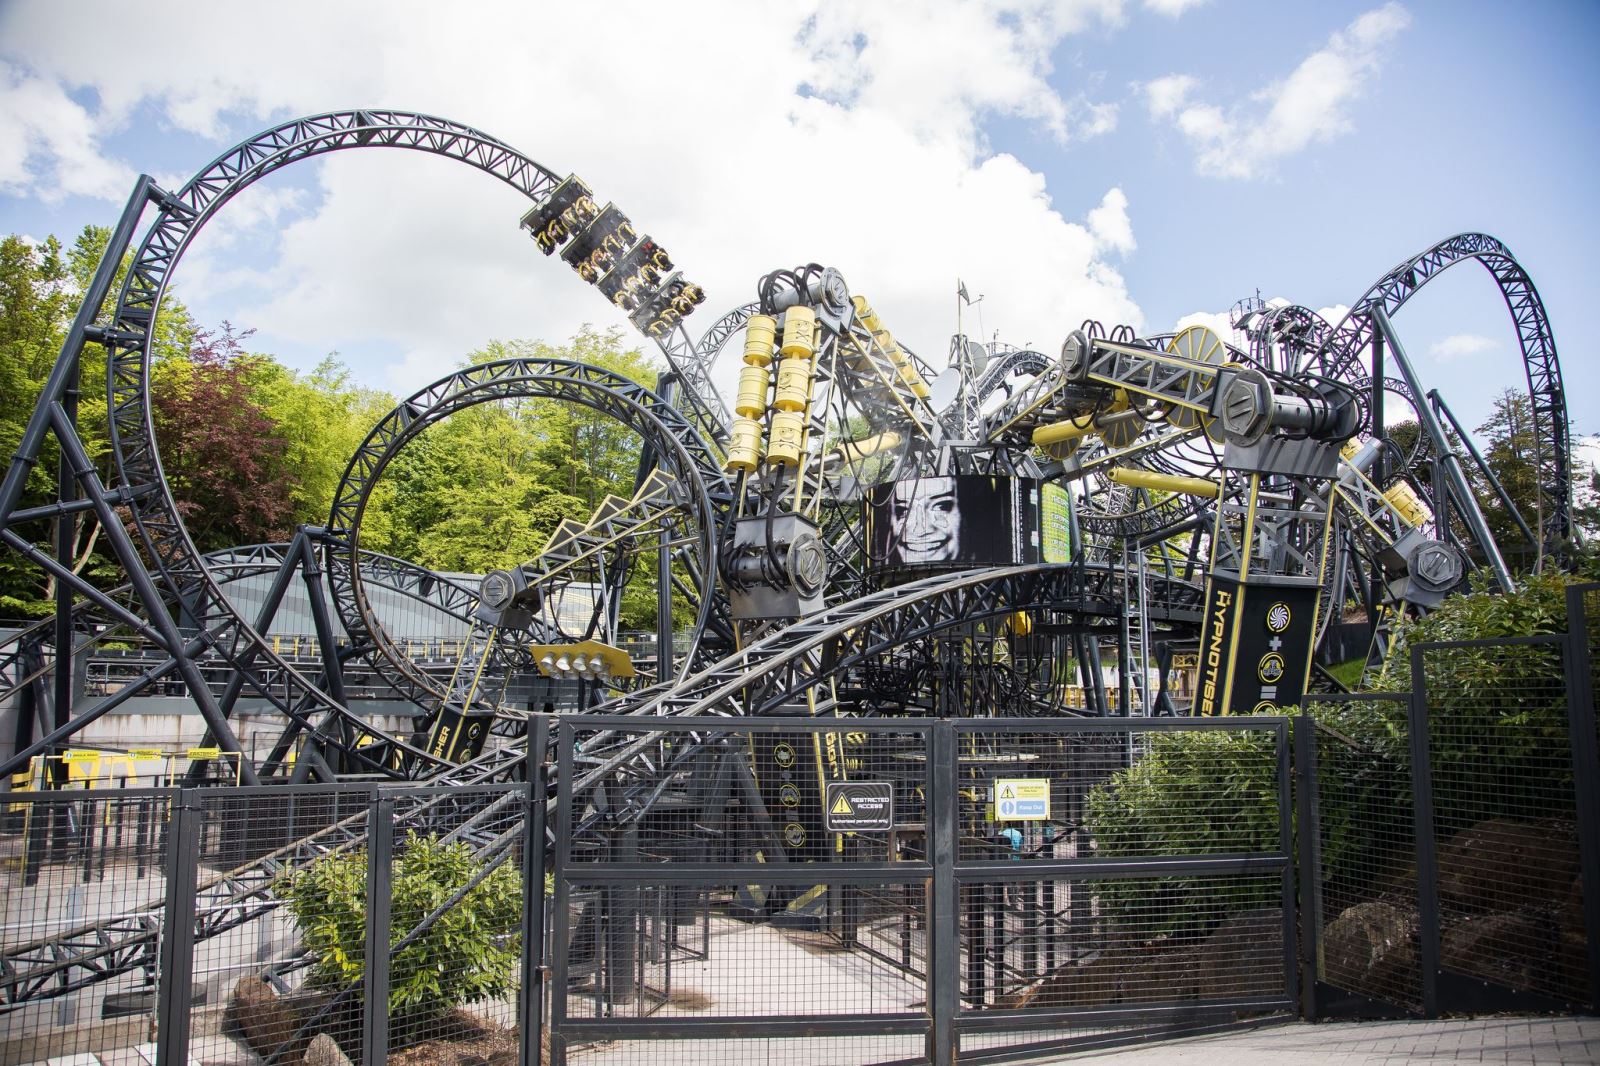 visit again for free alton towers